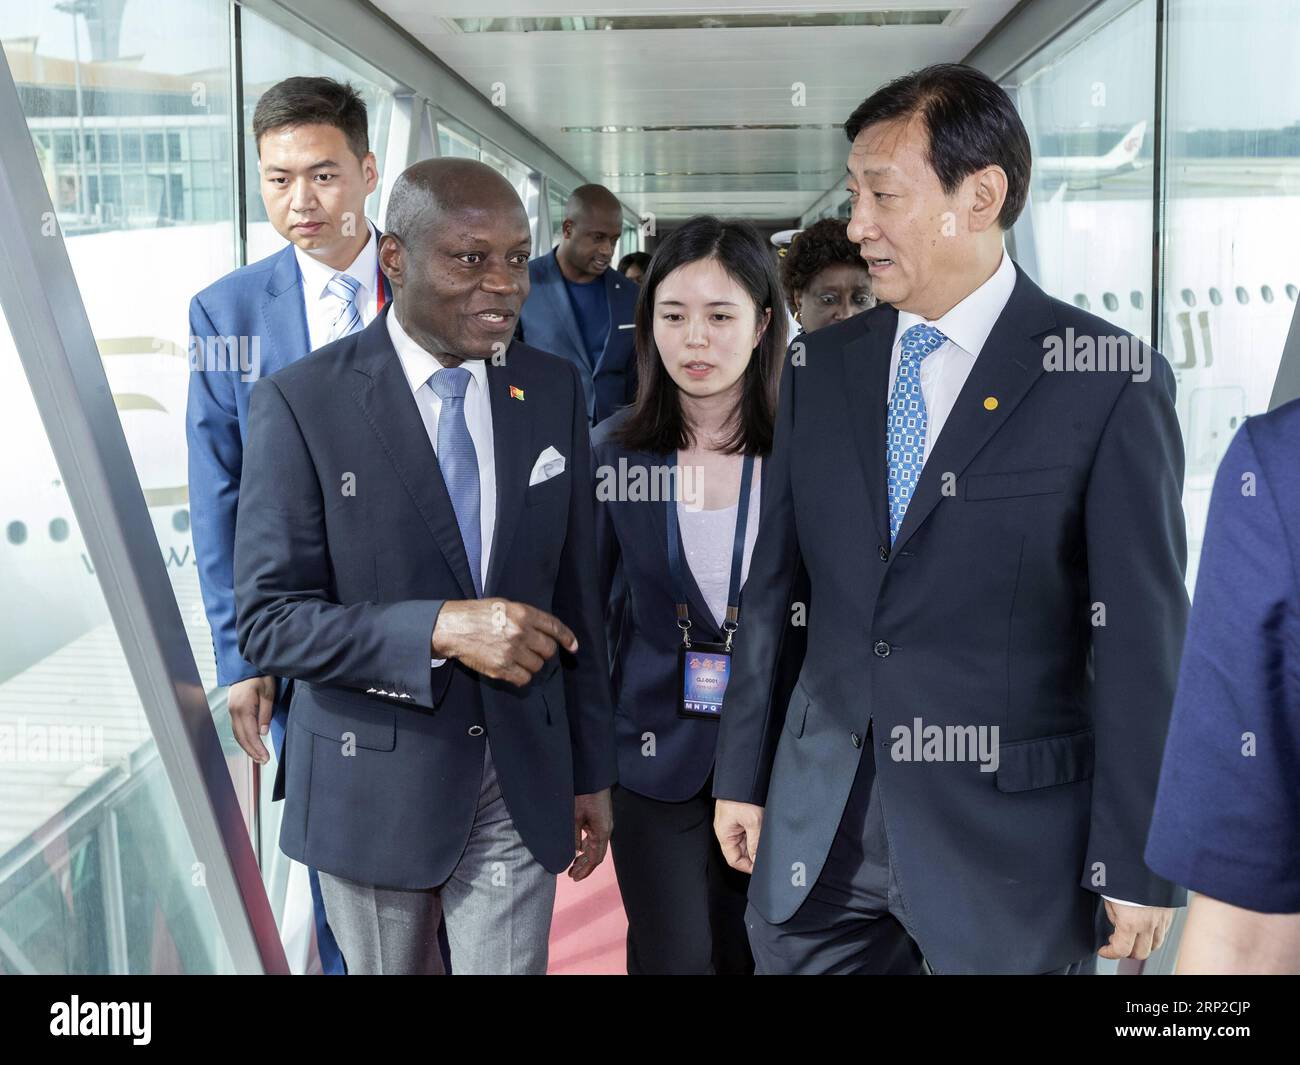 (180830) -- BEIJING, Aug. 30, 2018 -- President of Guinea-Bissau Jose Mario Vaz (L, front) arrives in Beijing, capital of China, Aug. 30, 2018, to attend the Beijing Summit of the Forum on China-Africa Cooperation (FOCAC). )(mcg) CHINA-BEIJING-GUINEA-BISSAU-PRESIDENT-ARRIVAL (CN) ShenxBohan PUBLICATIONxNOTxINxCHN Stock Photo